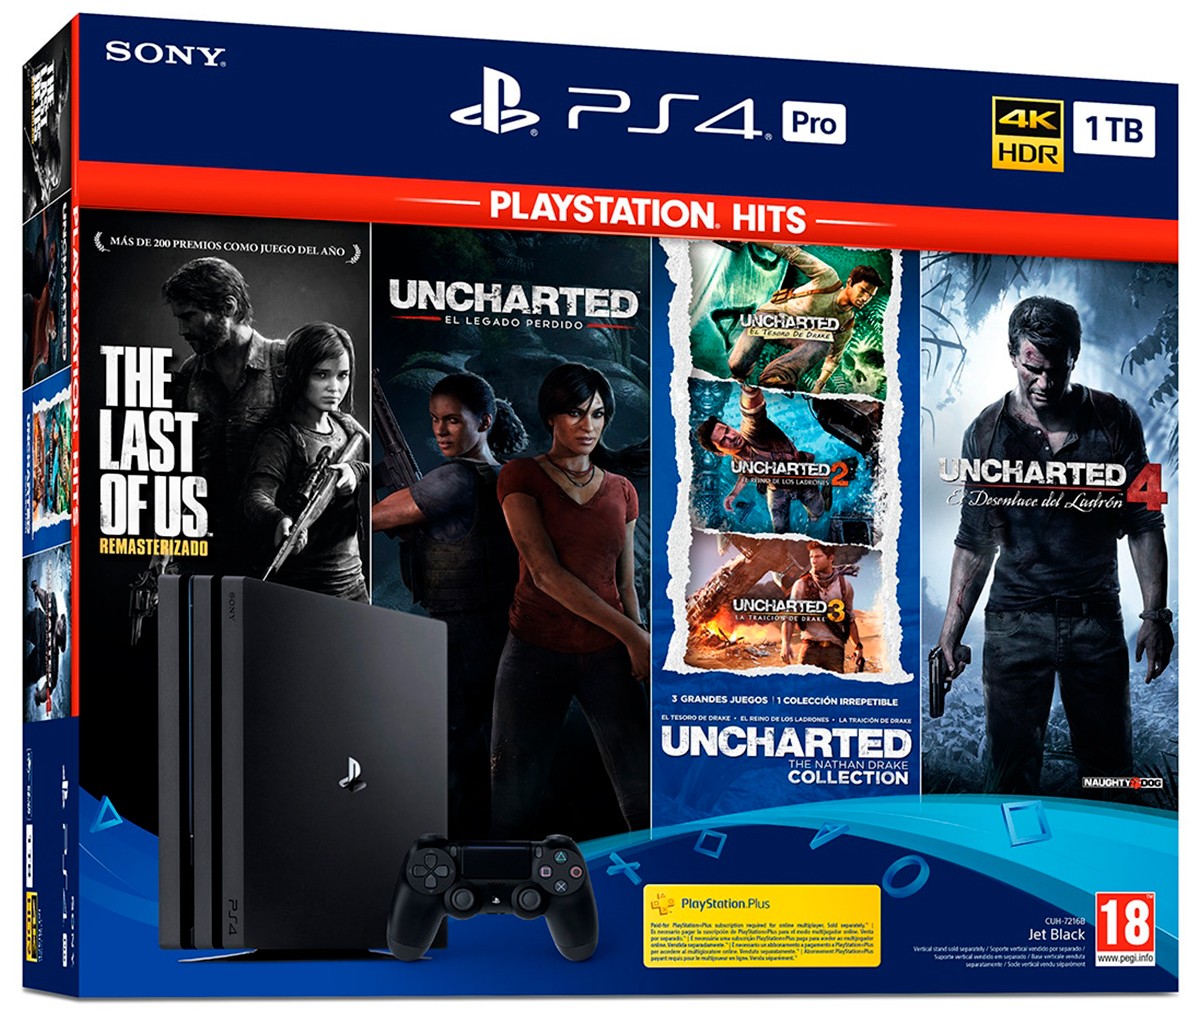 uncharted 4 price